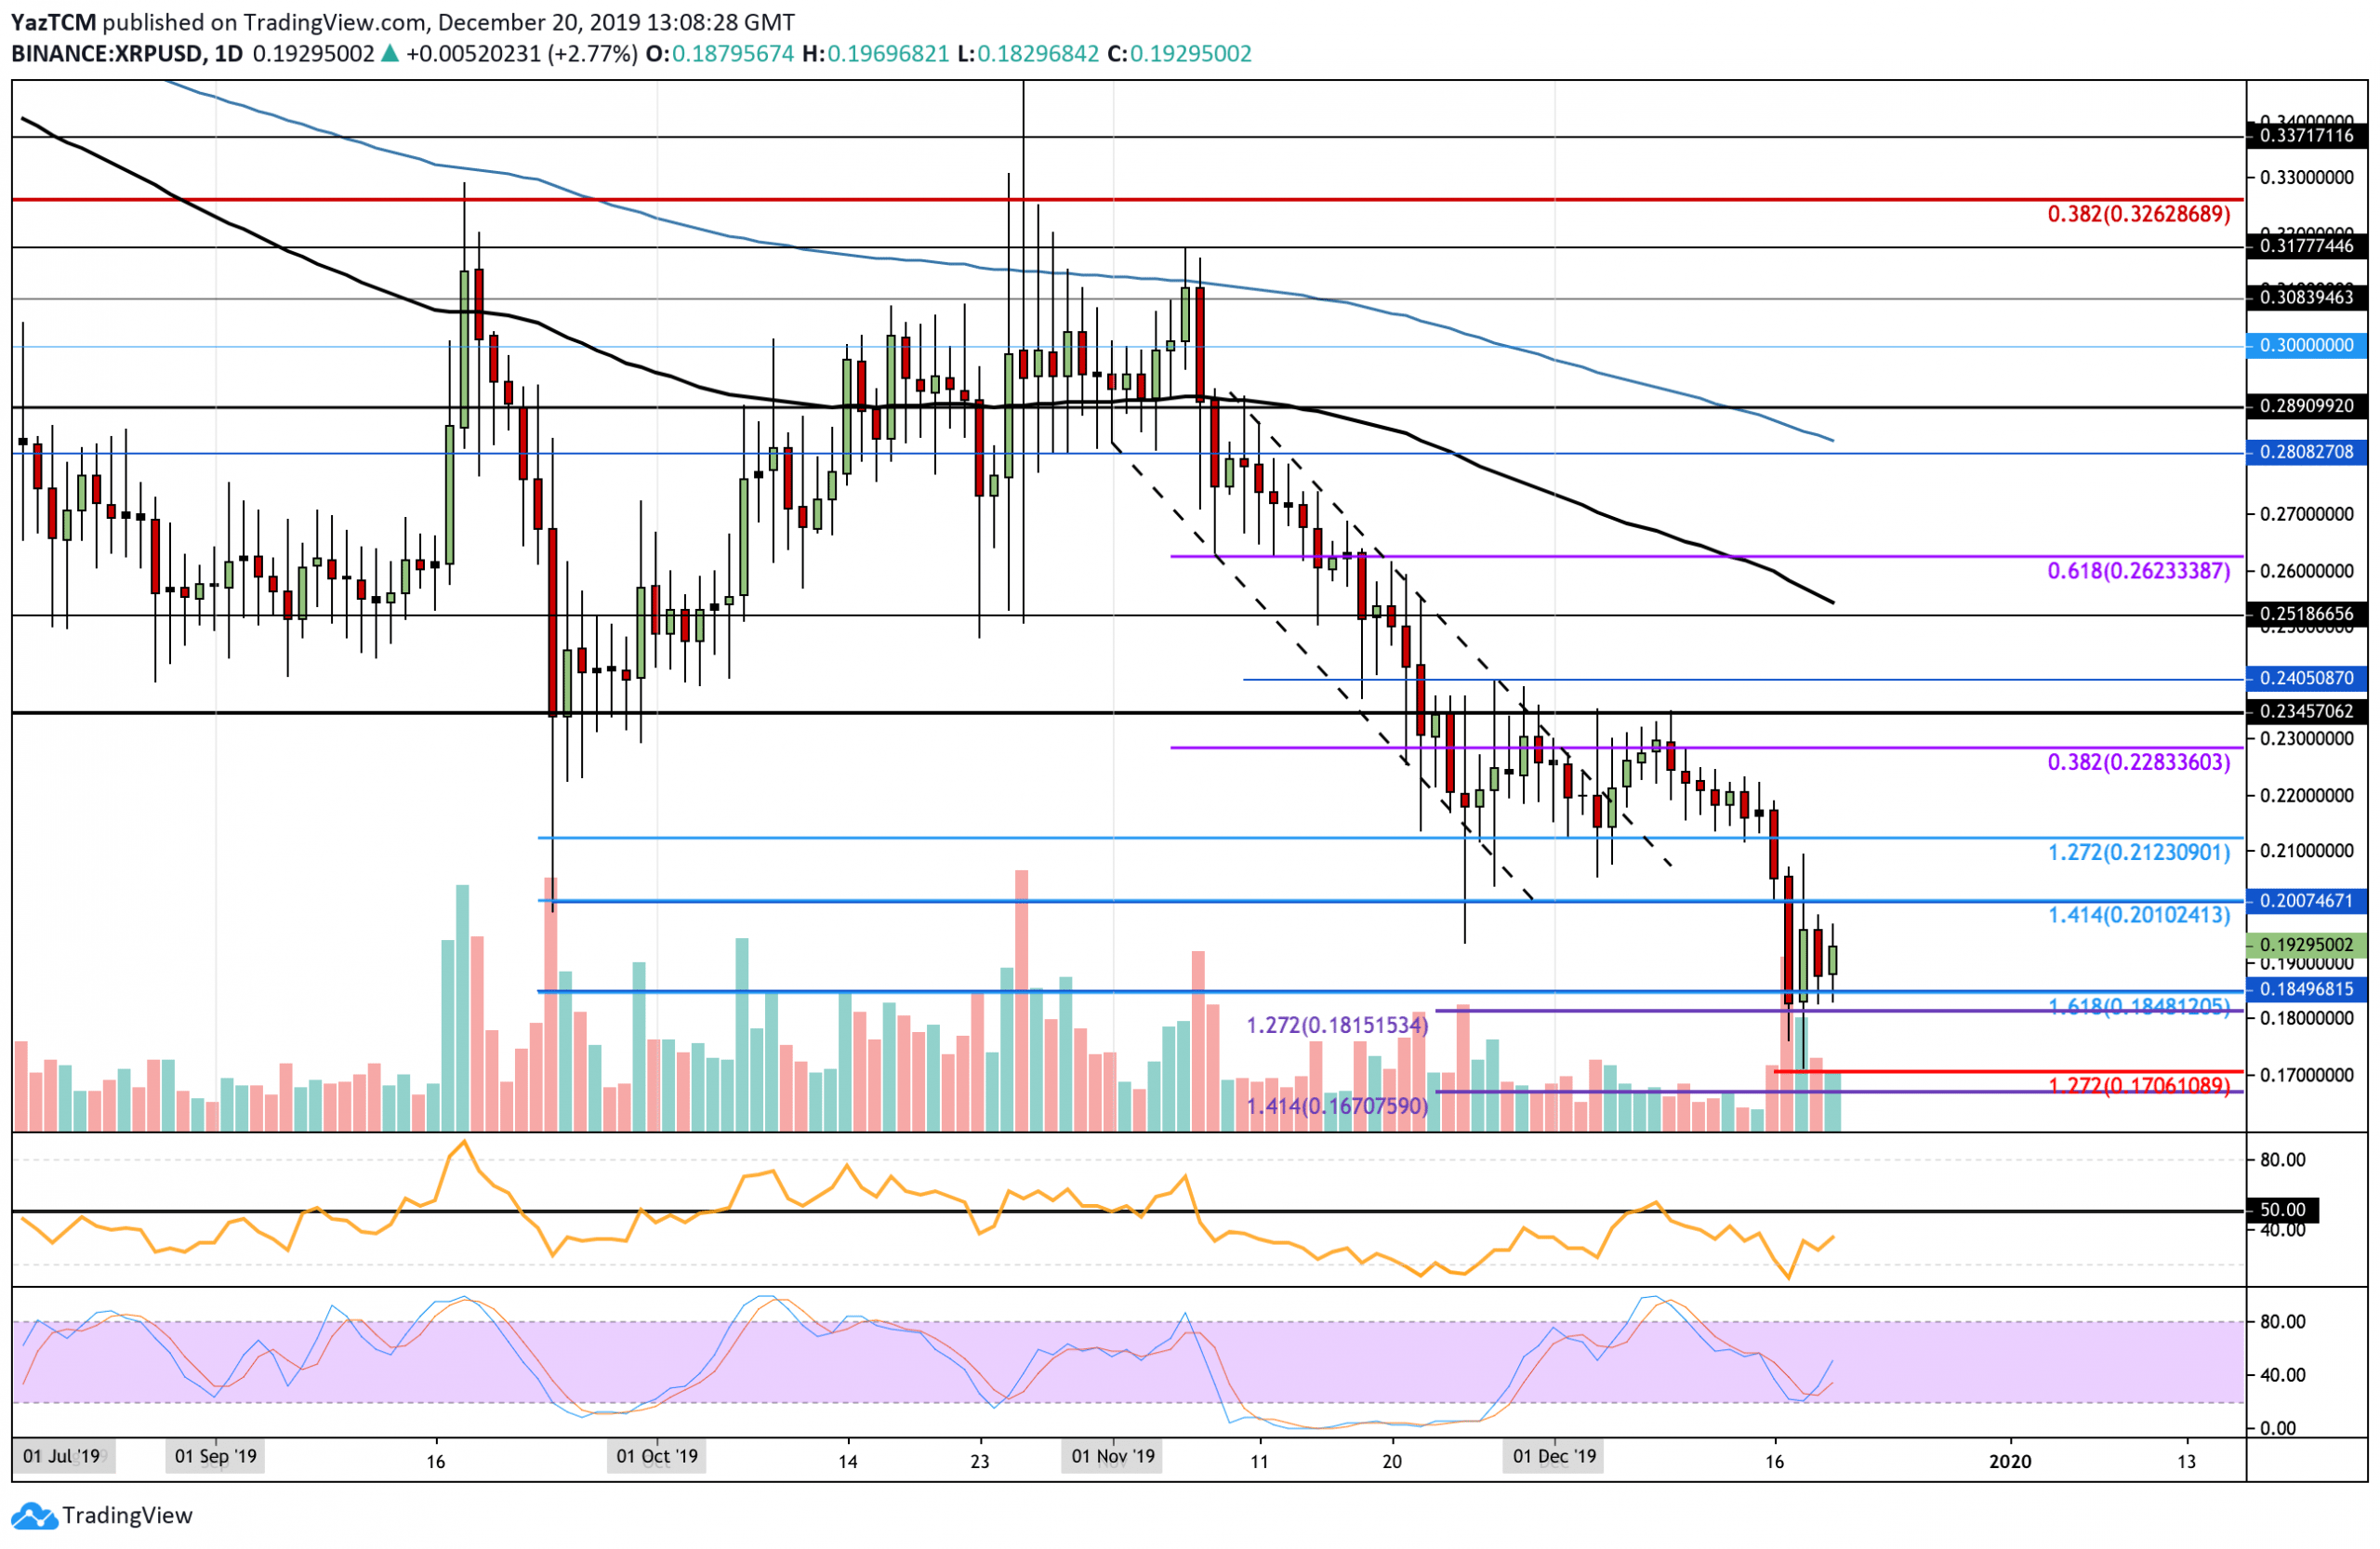 Crypto Price Analysis & Overview December 20th: Bitcoin, Ethereum, Ripple, Litecoin, and Binance Coin.